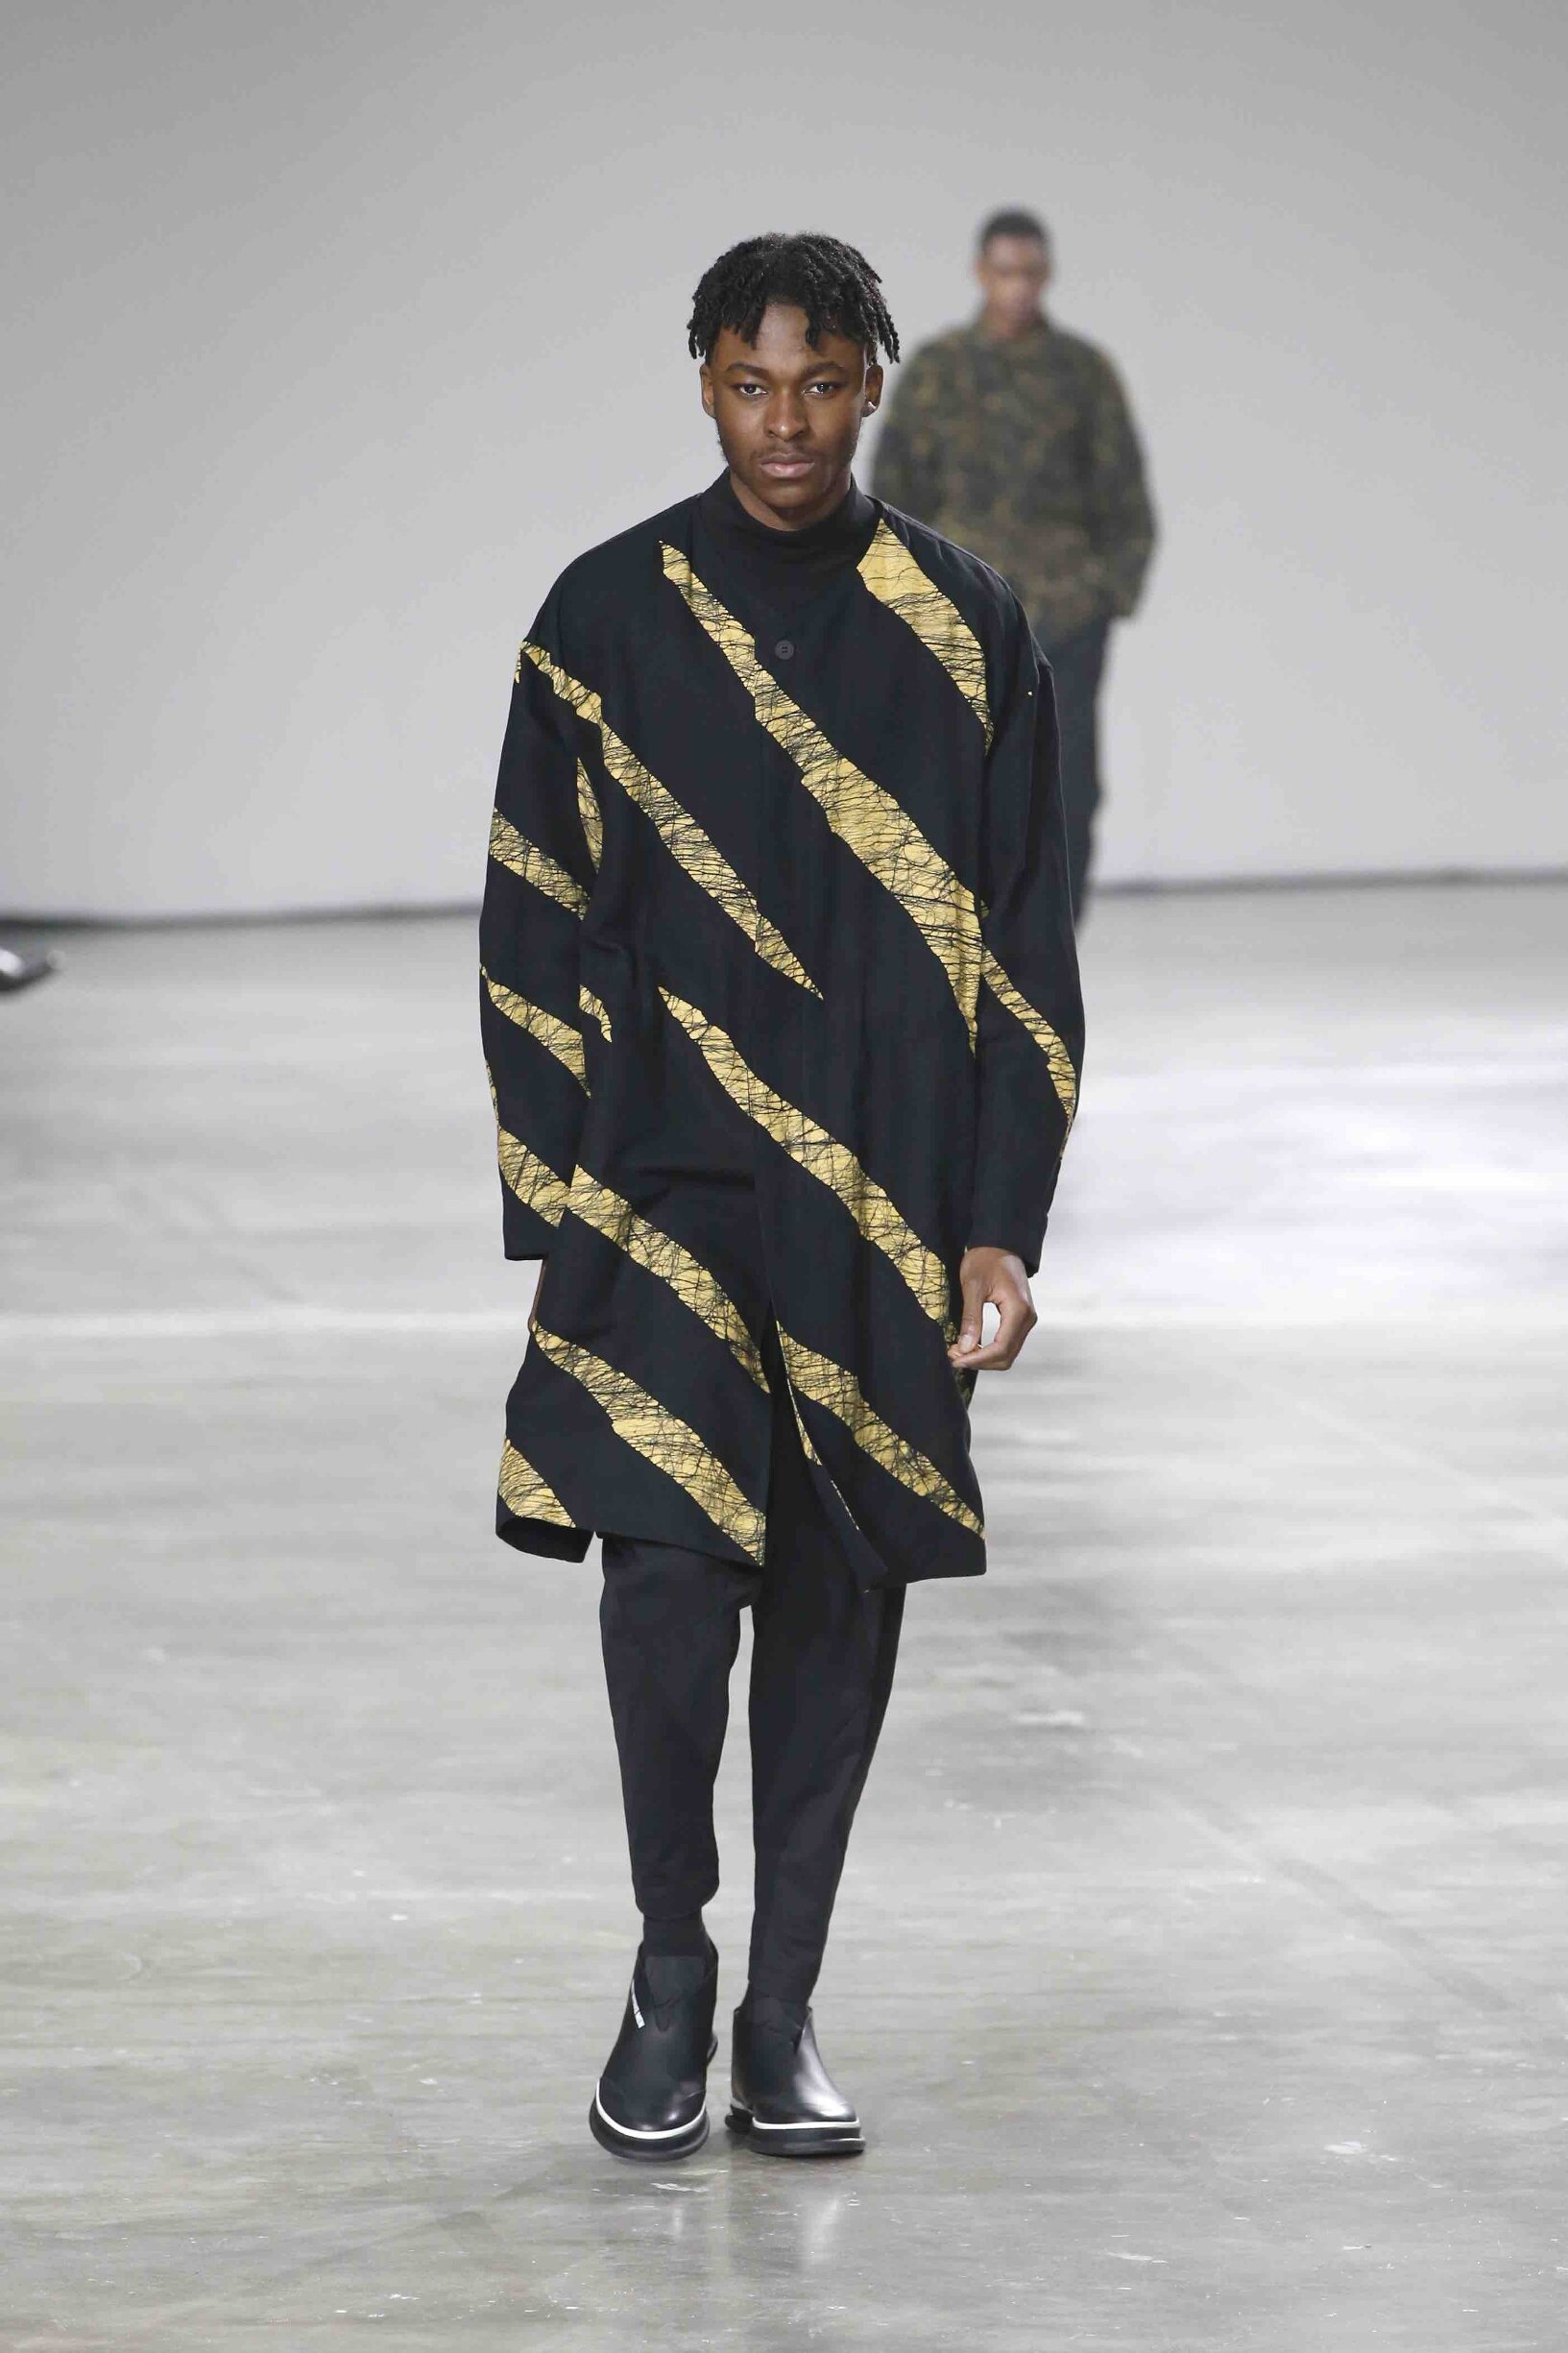 ISSEY MIYAKE FALL WINTER 2019 MEN’S COLLECTION | The Skinny Beep